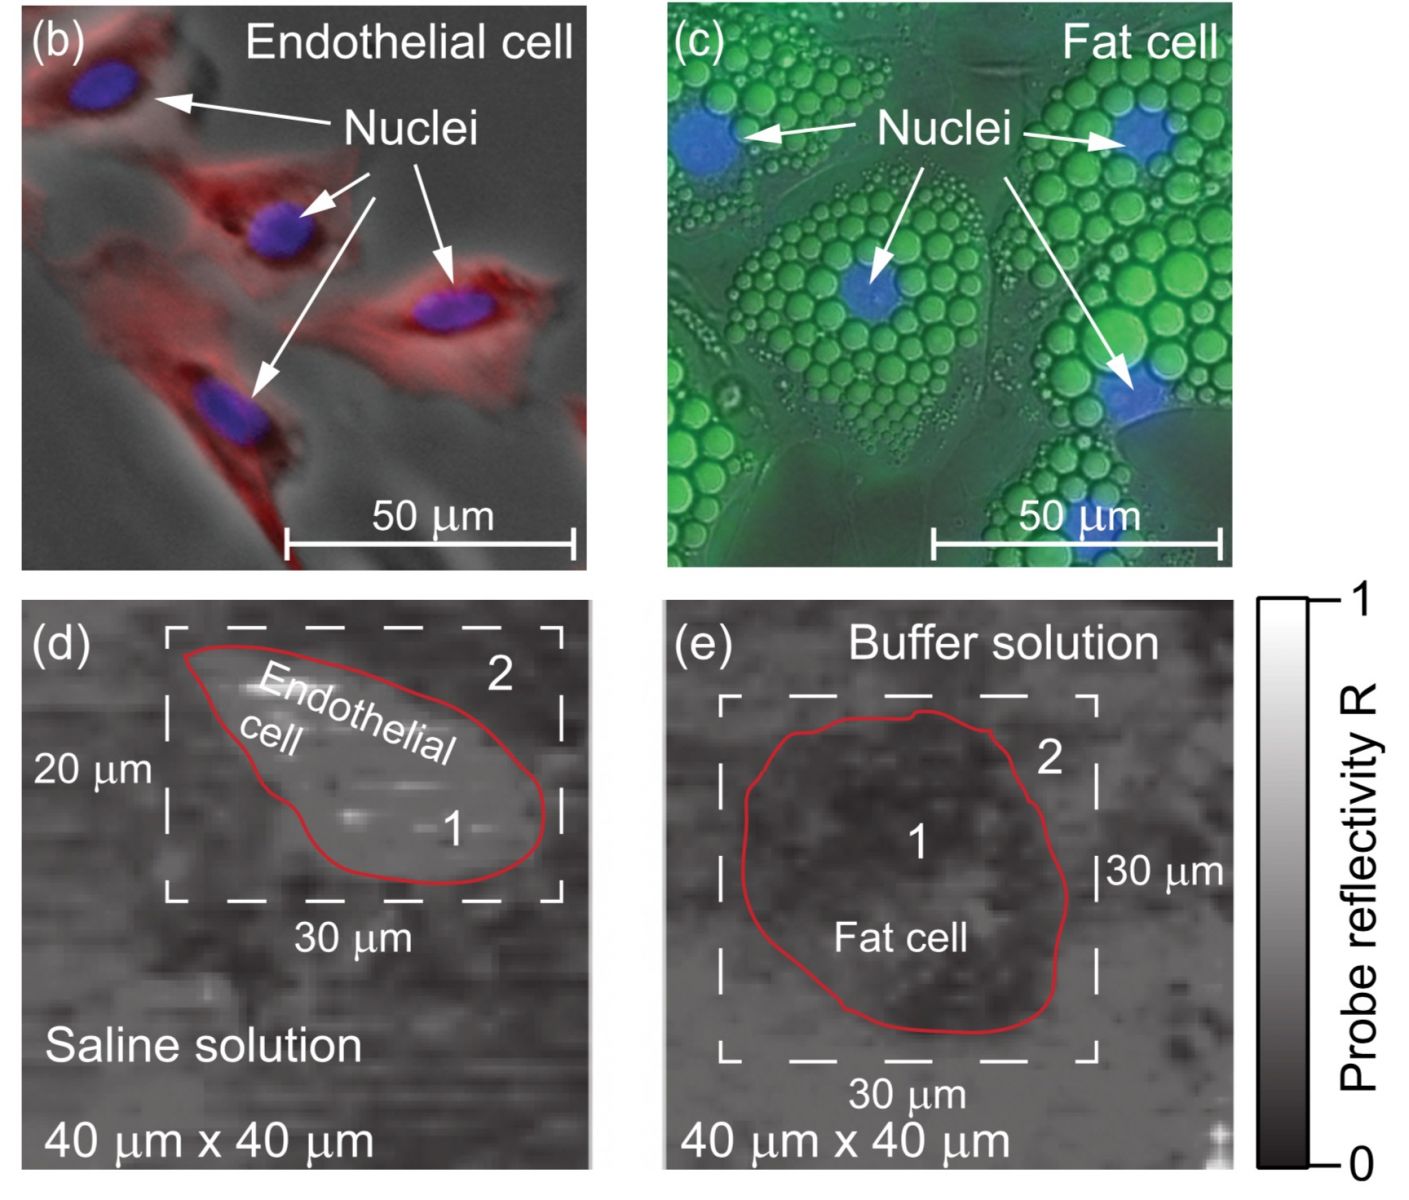 Picosecond ultrasonics ‒ 3D cell imaging technique with high frequency  acoustic waves : มหาวิทยาลัยวลัยลักษณ์